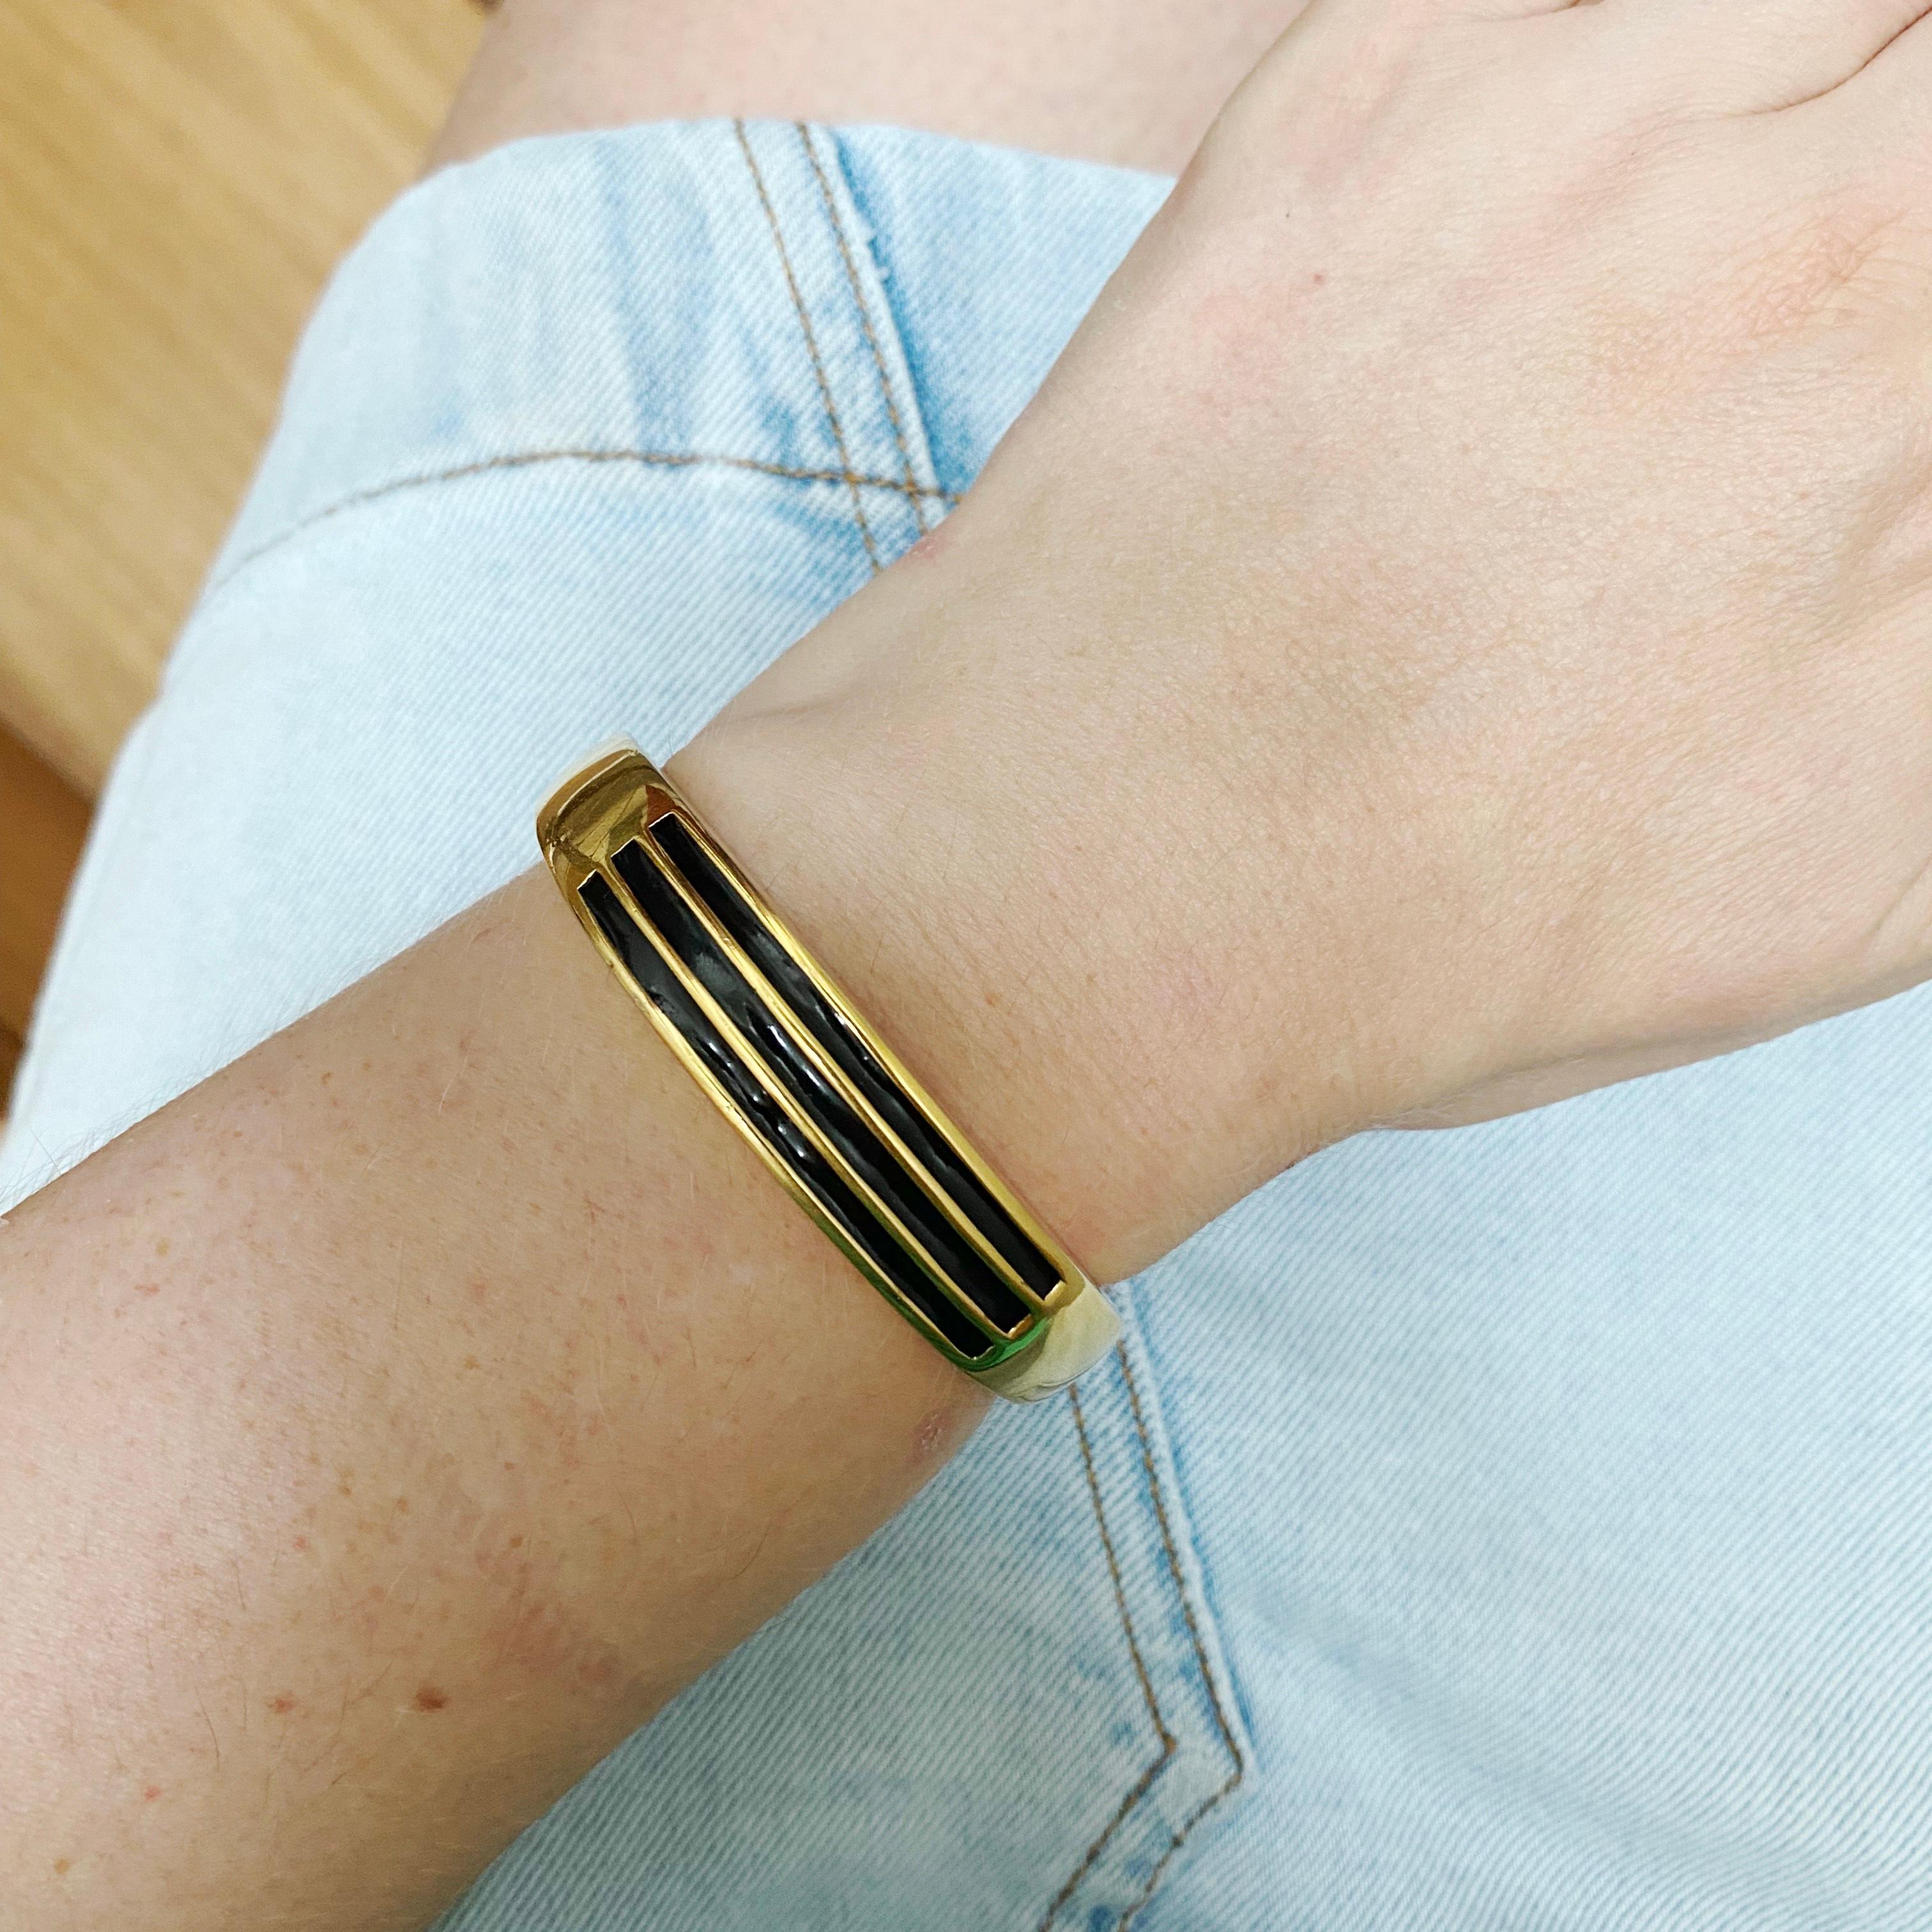 Modernist style bangle by French designer, Givenchy. High polish goldtone metal with enamel detail. In good vintage condition.  A fantastic piece to style with contemporary clothing trends. 